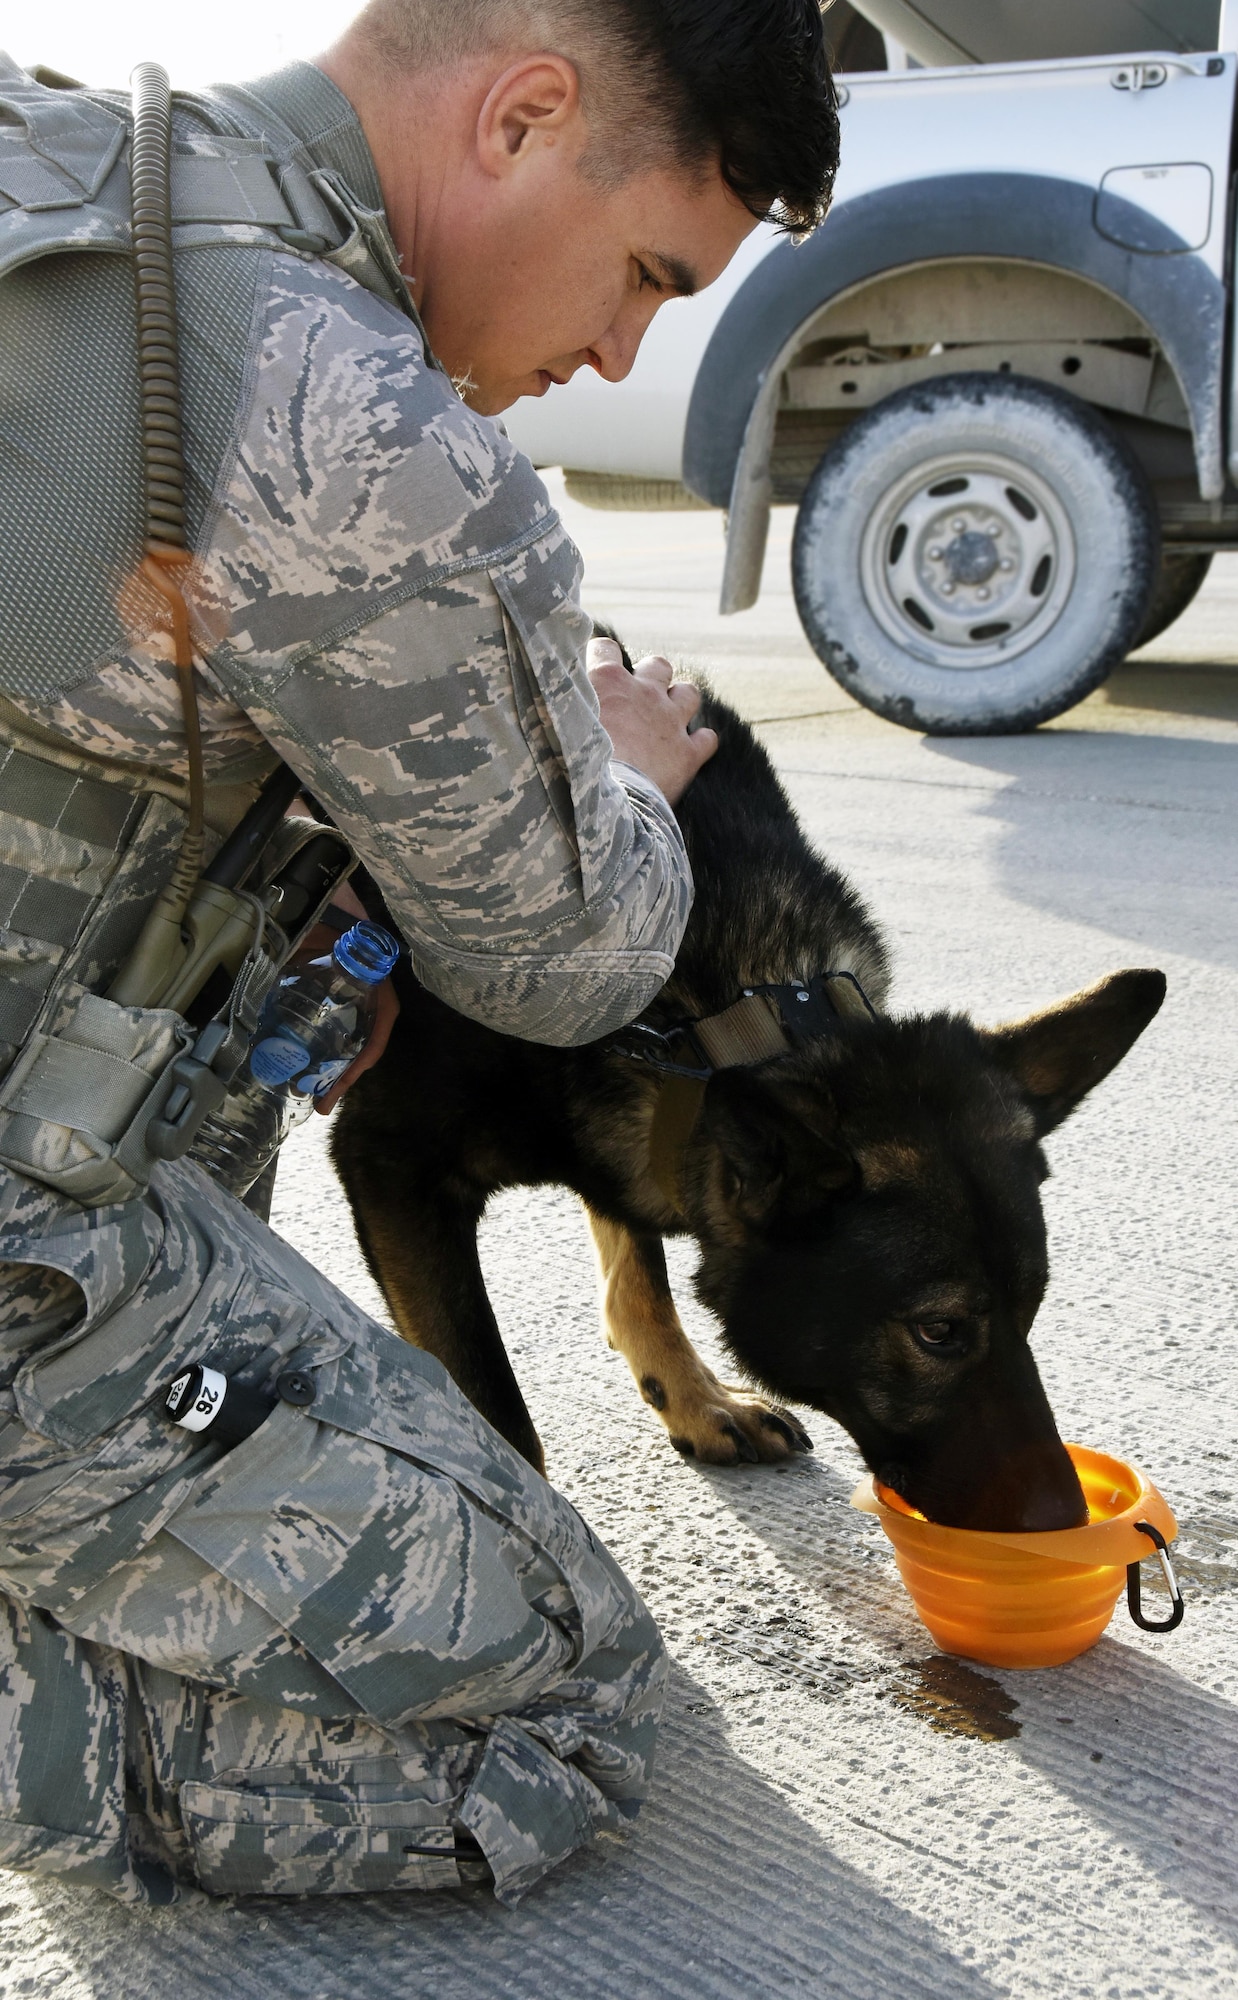 U.S. Air Force Staff Sgt. Dustin Braddy, a military working dog handler with the 379th Expeditionary Security Forces Squadron, gives his military working dog Jimo water after detection training on an aircraft at Al Udeid Air Base, Qatar, April 15, 2017. Braddy and Jimo are one of several military working dog teams here supporting Operation Inherent Resolve. (U.S. Air Force photo by Senior Airman Cynthia A. Innocenti)